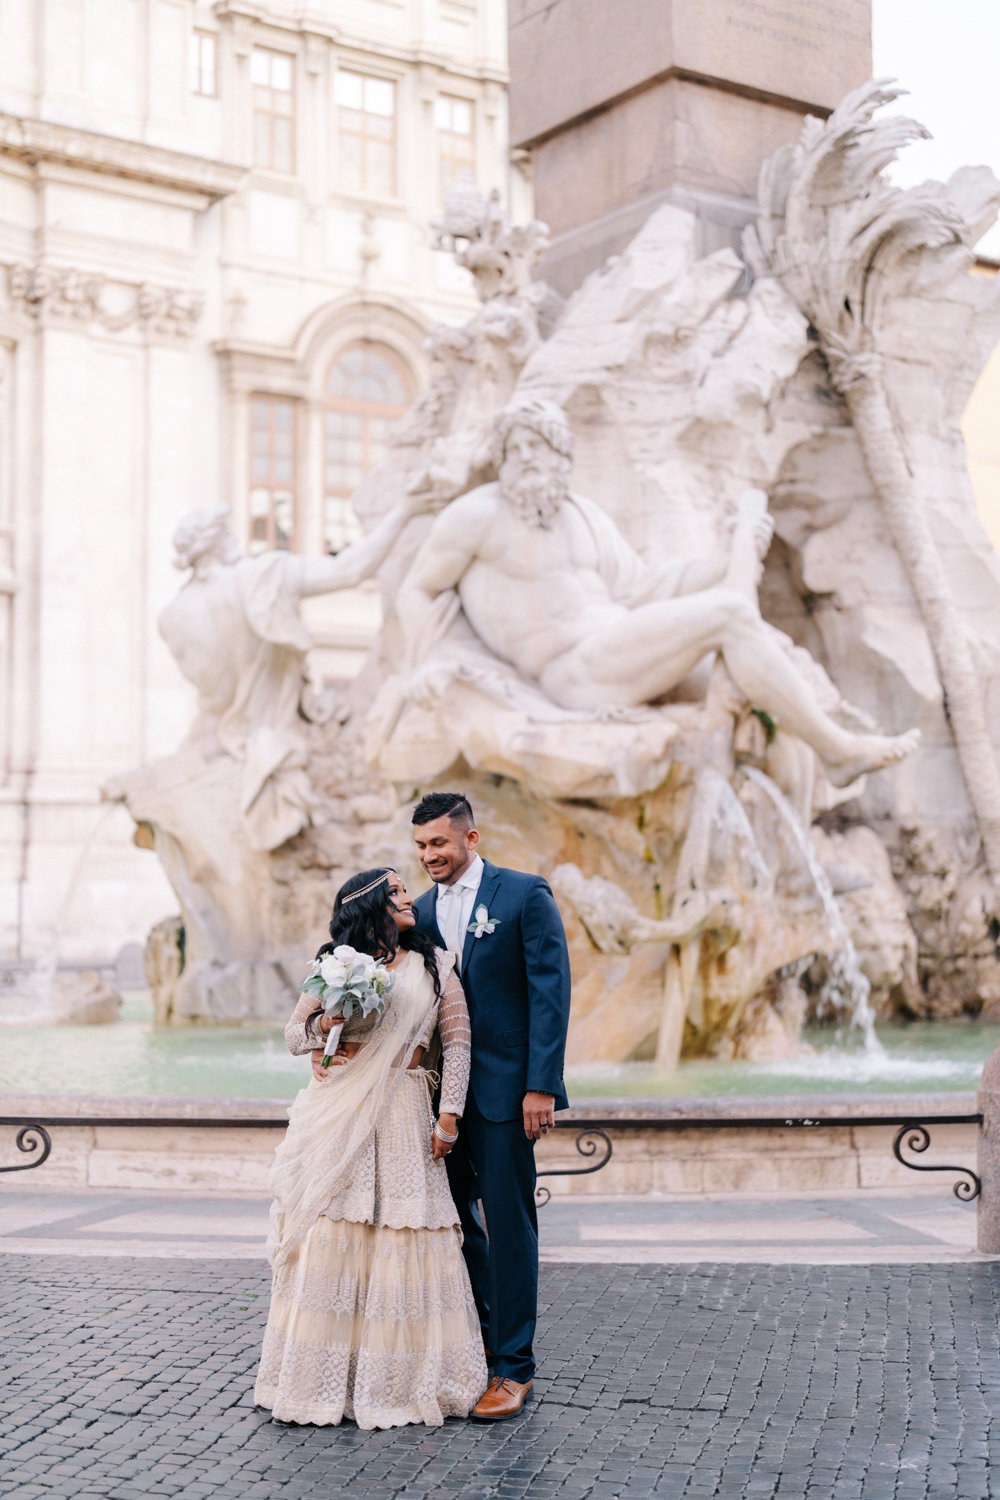 Alina Indi is a wedding professional photographer in Italy, Venice and Rome. 